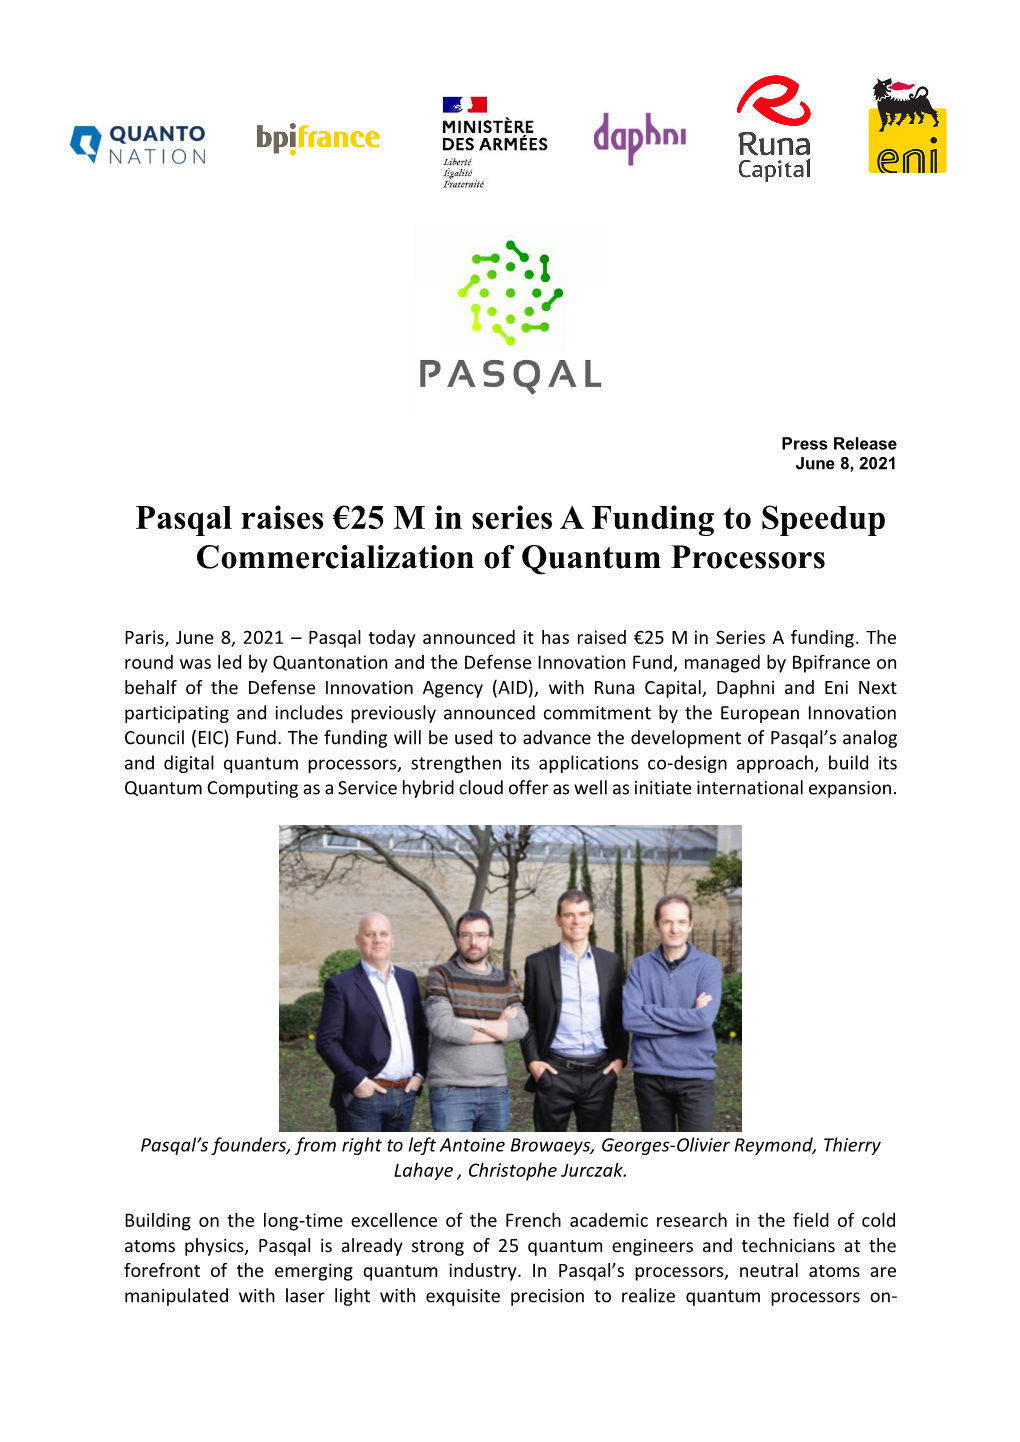 Pasqal Raises €25 M in Series a Funding to Speedup Commercialization of Quantum Processors